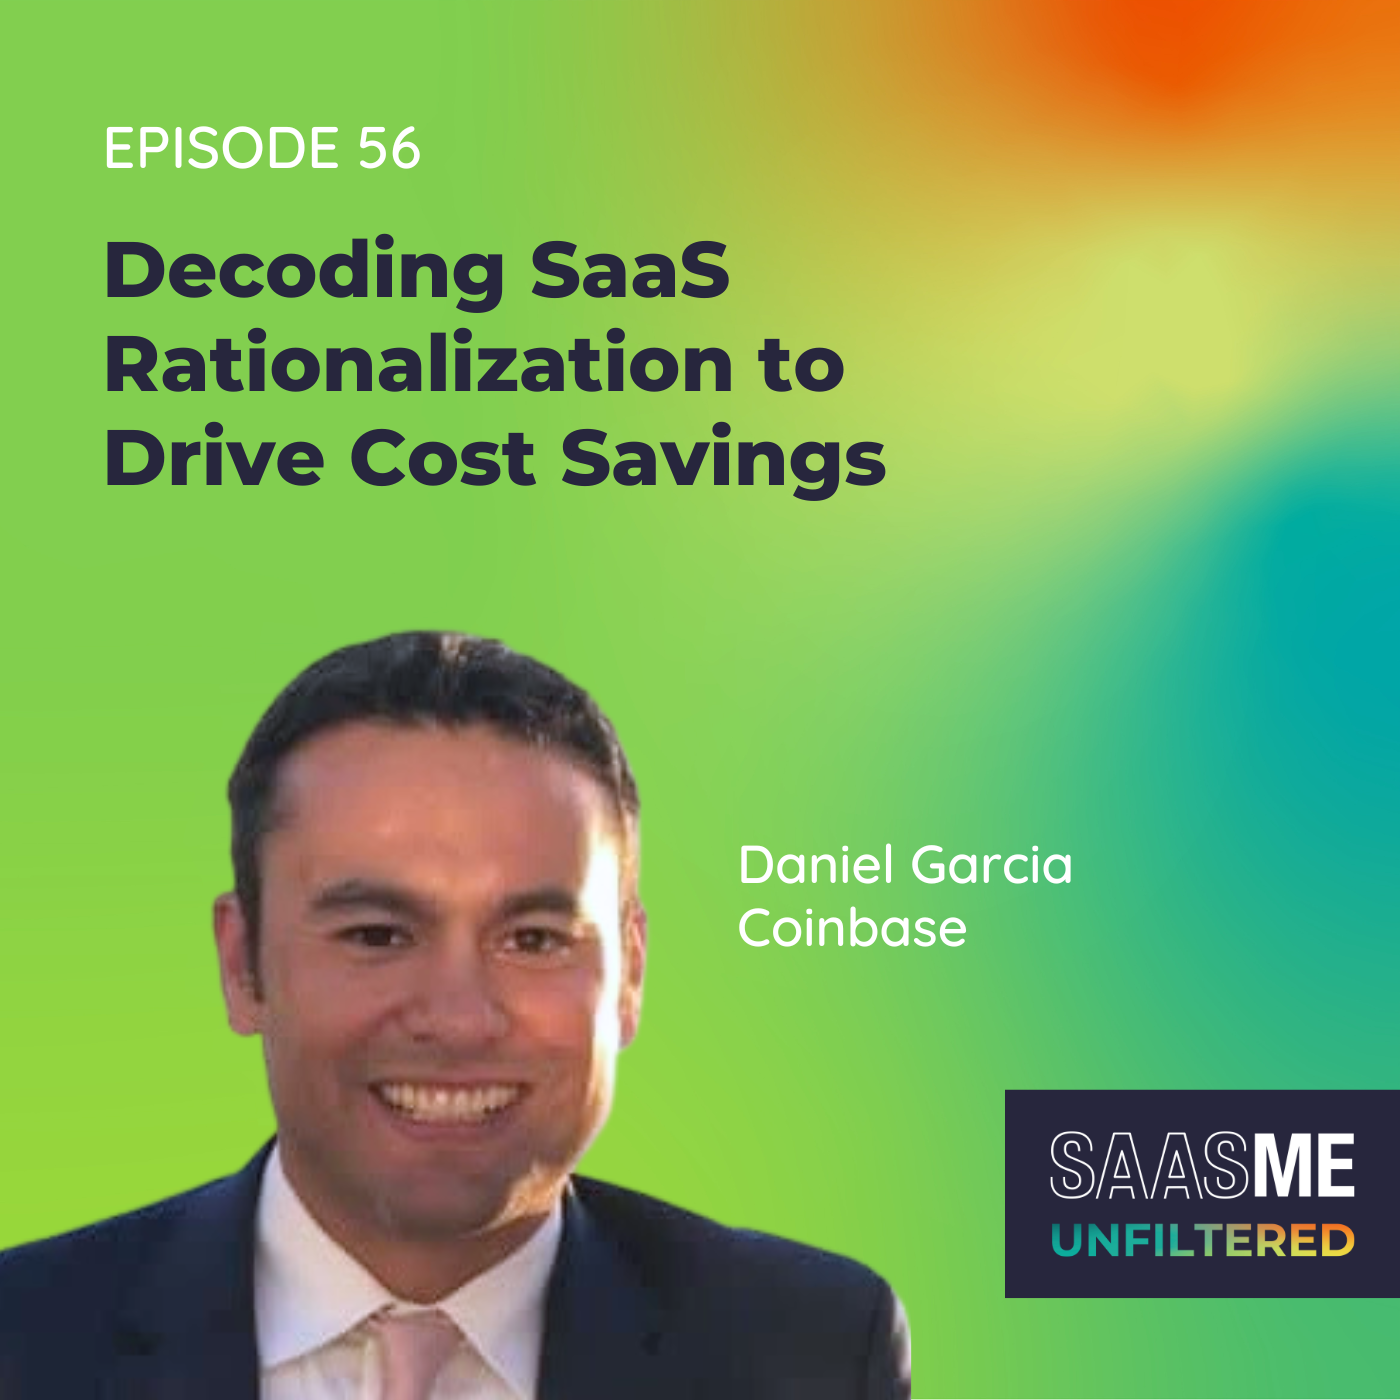 Decoding SaaS Rationalization to Drive Cost Savings with Daniel Garcia (Coinbase)